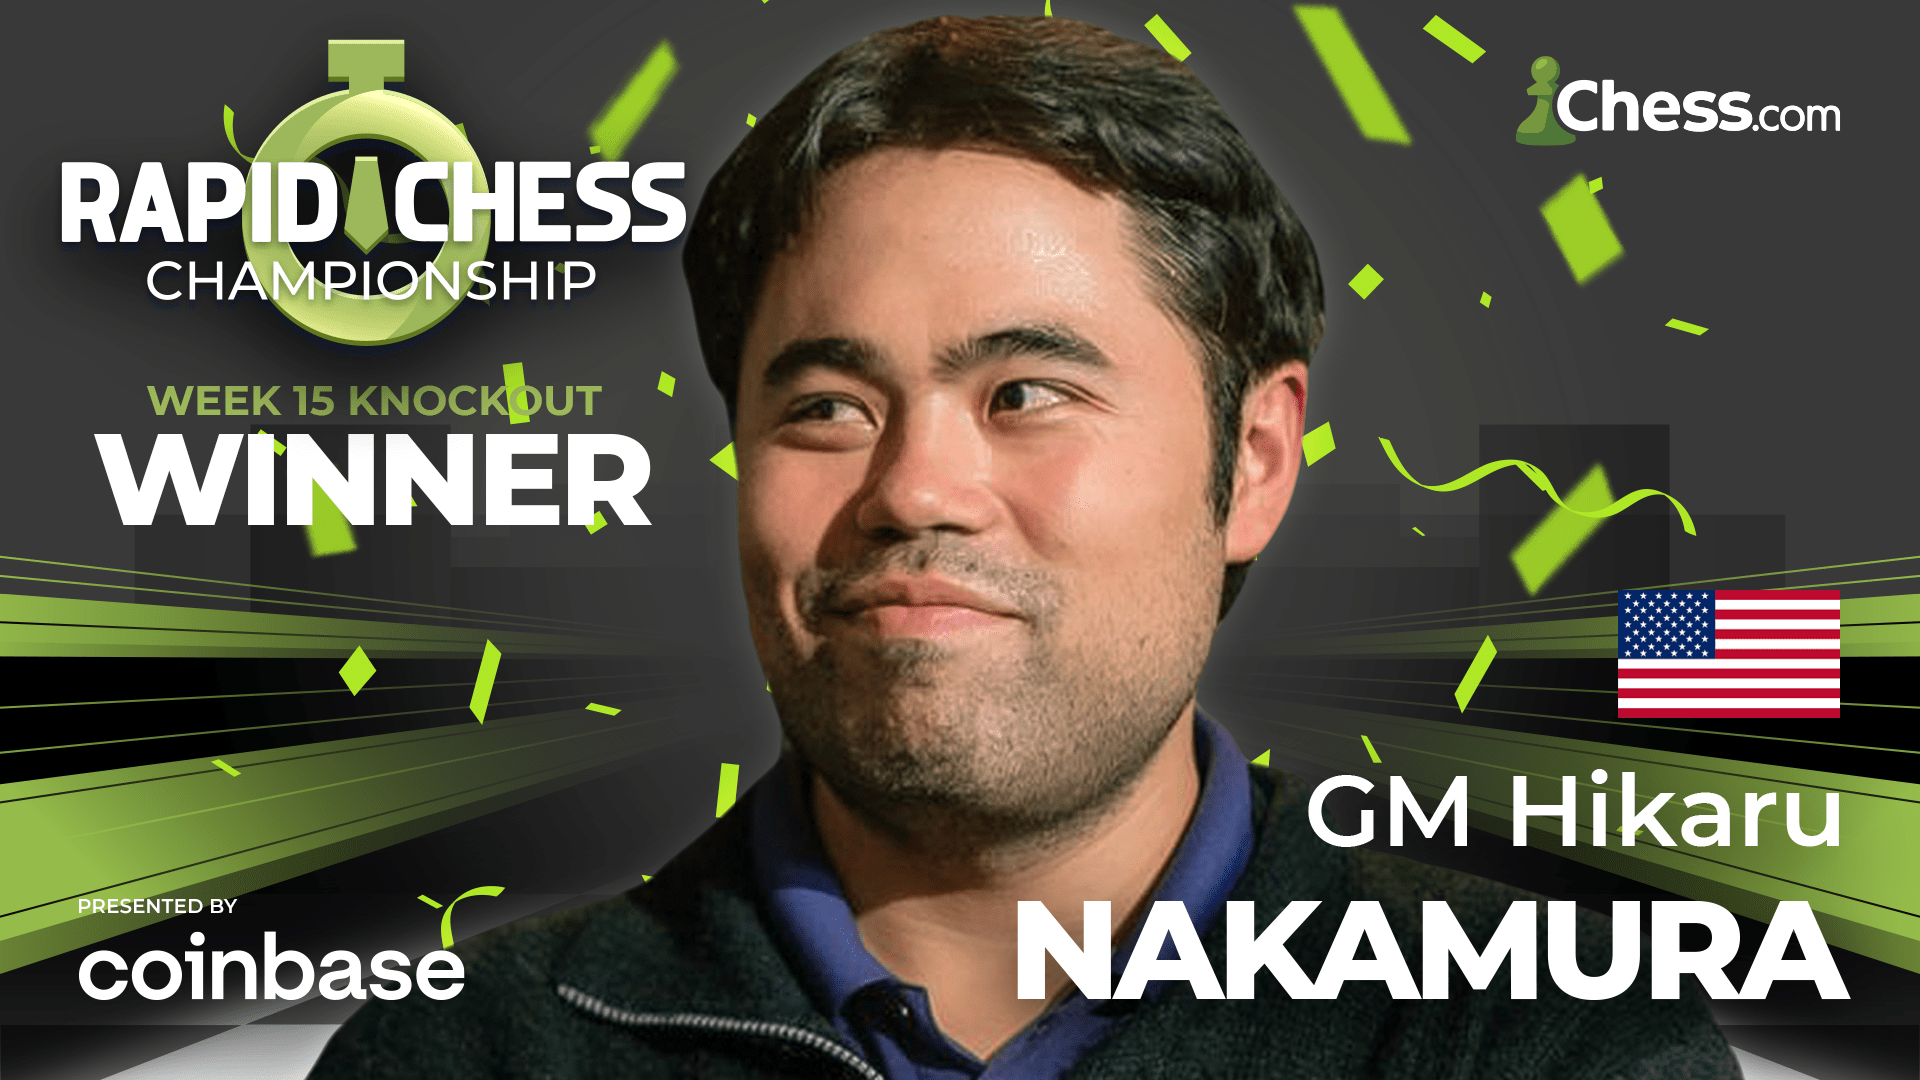 chess24.com on X: Hikaru Nakamura won $27,000 as the runner-up in the  Lindores Abbey Rapid Challenge. As a Top 4 finisher he qualifies for the  next event in the Magnus Carlsen Chess